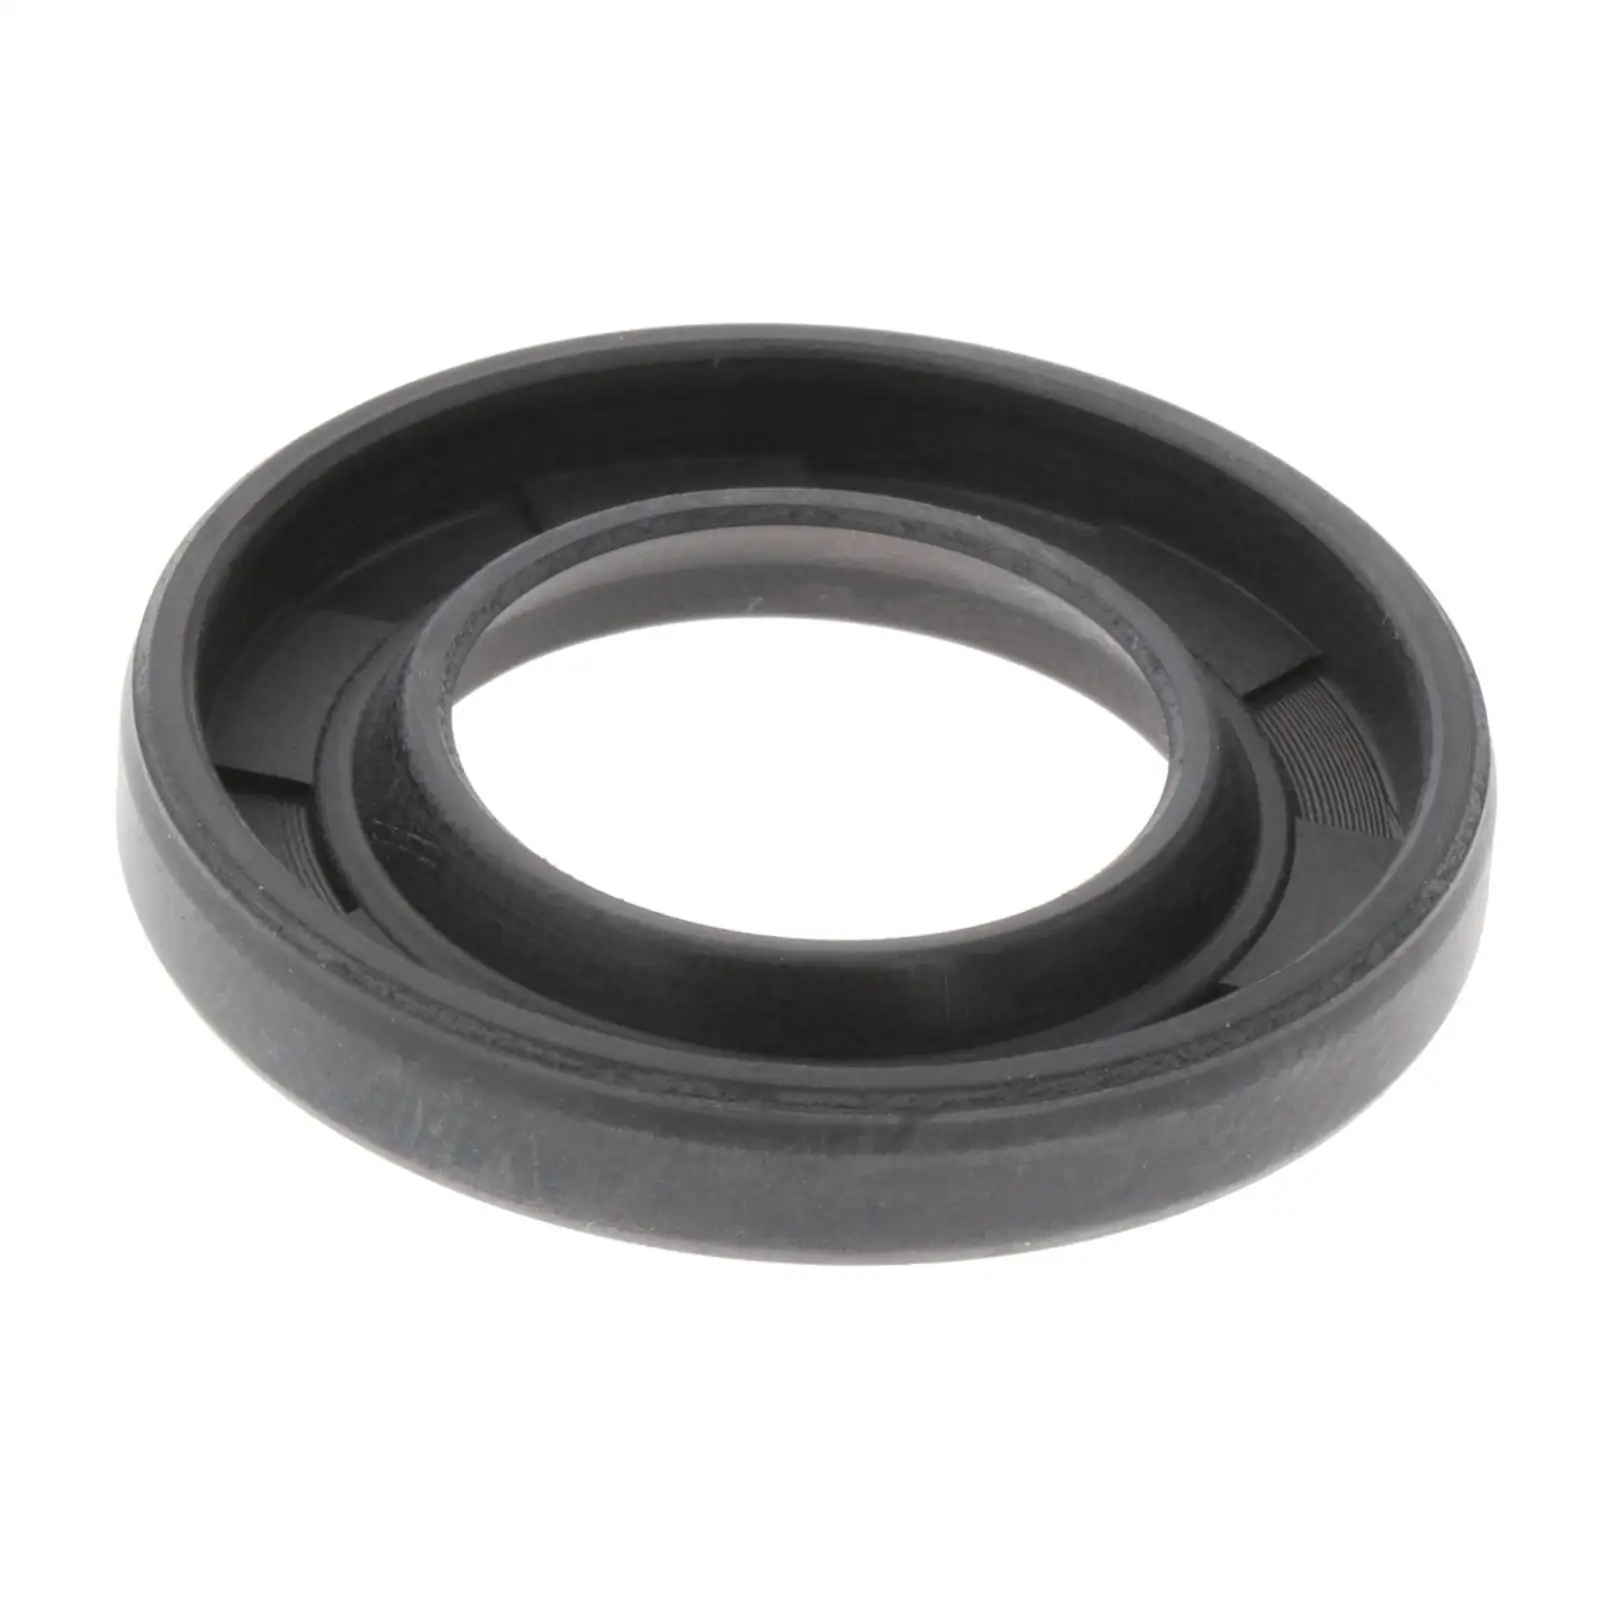 Oil Seal Fit for  Outboard Motor 60HP 70HP Outboard Engine 2T 3cyl